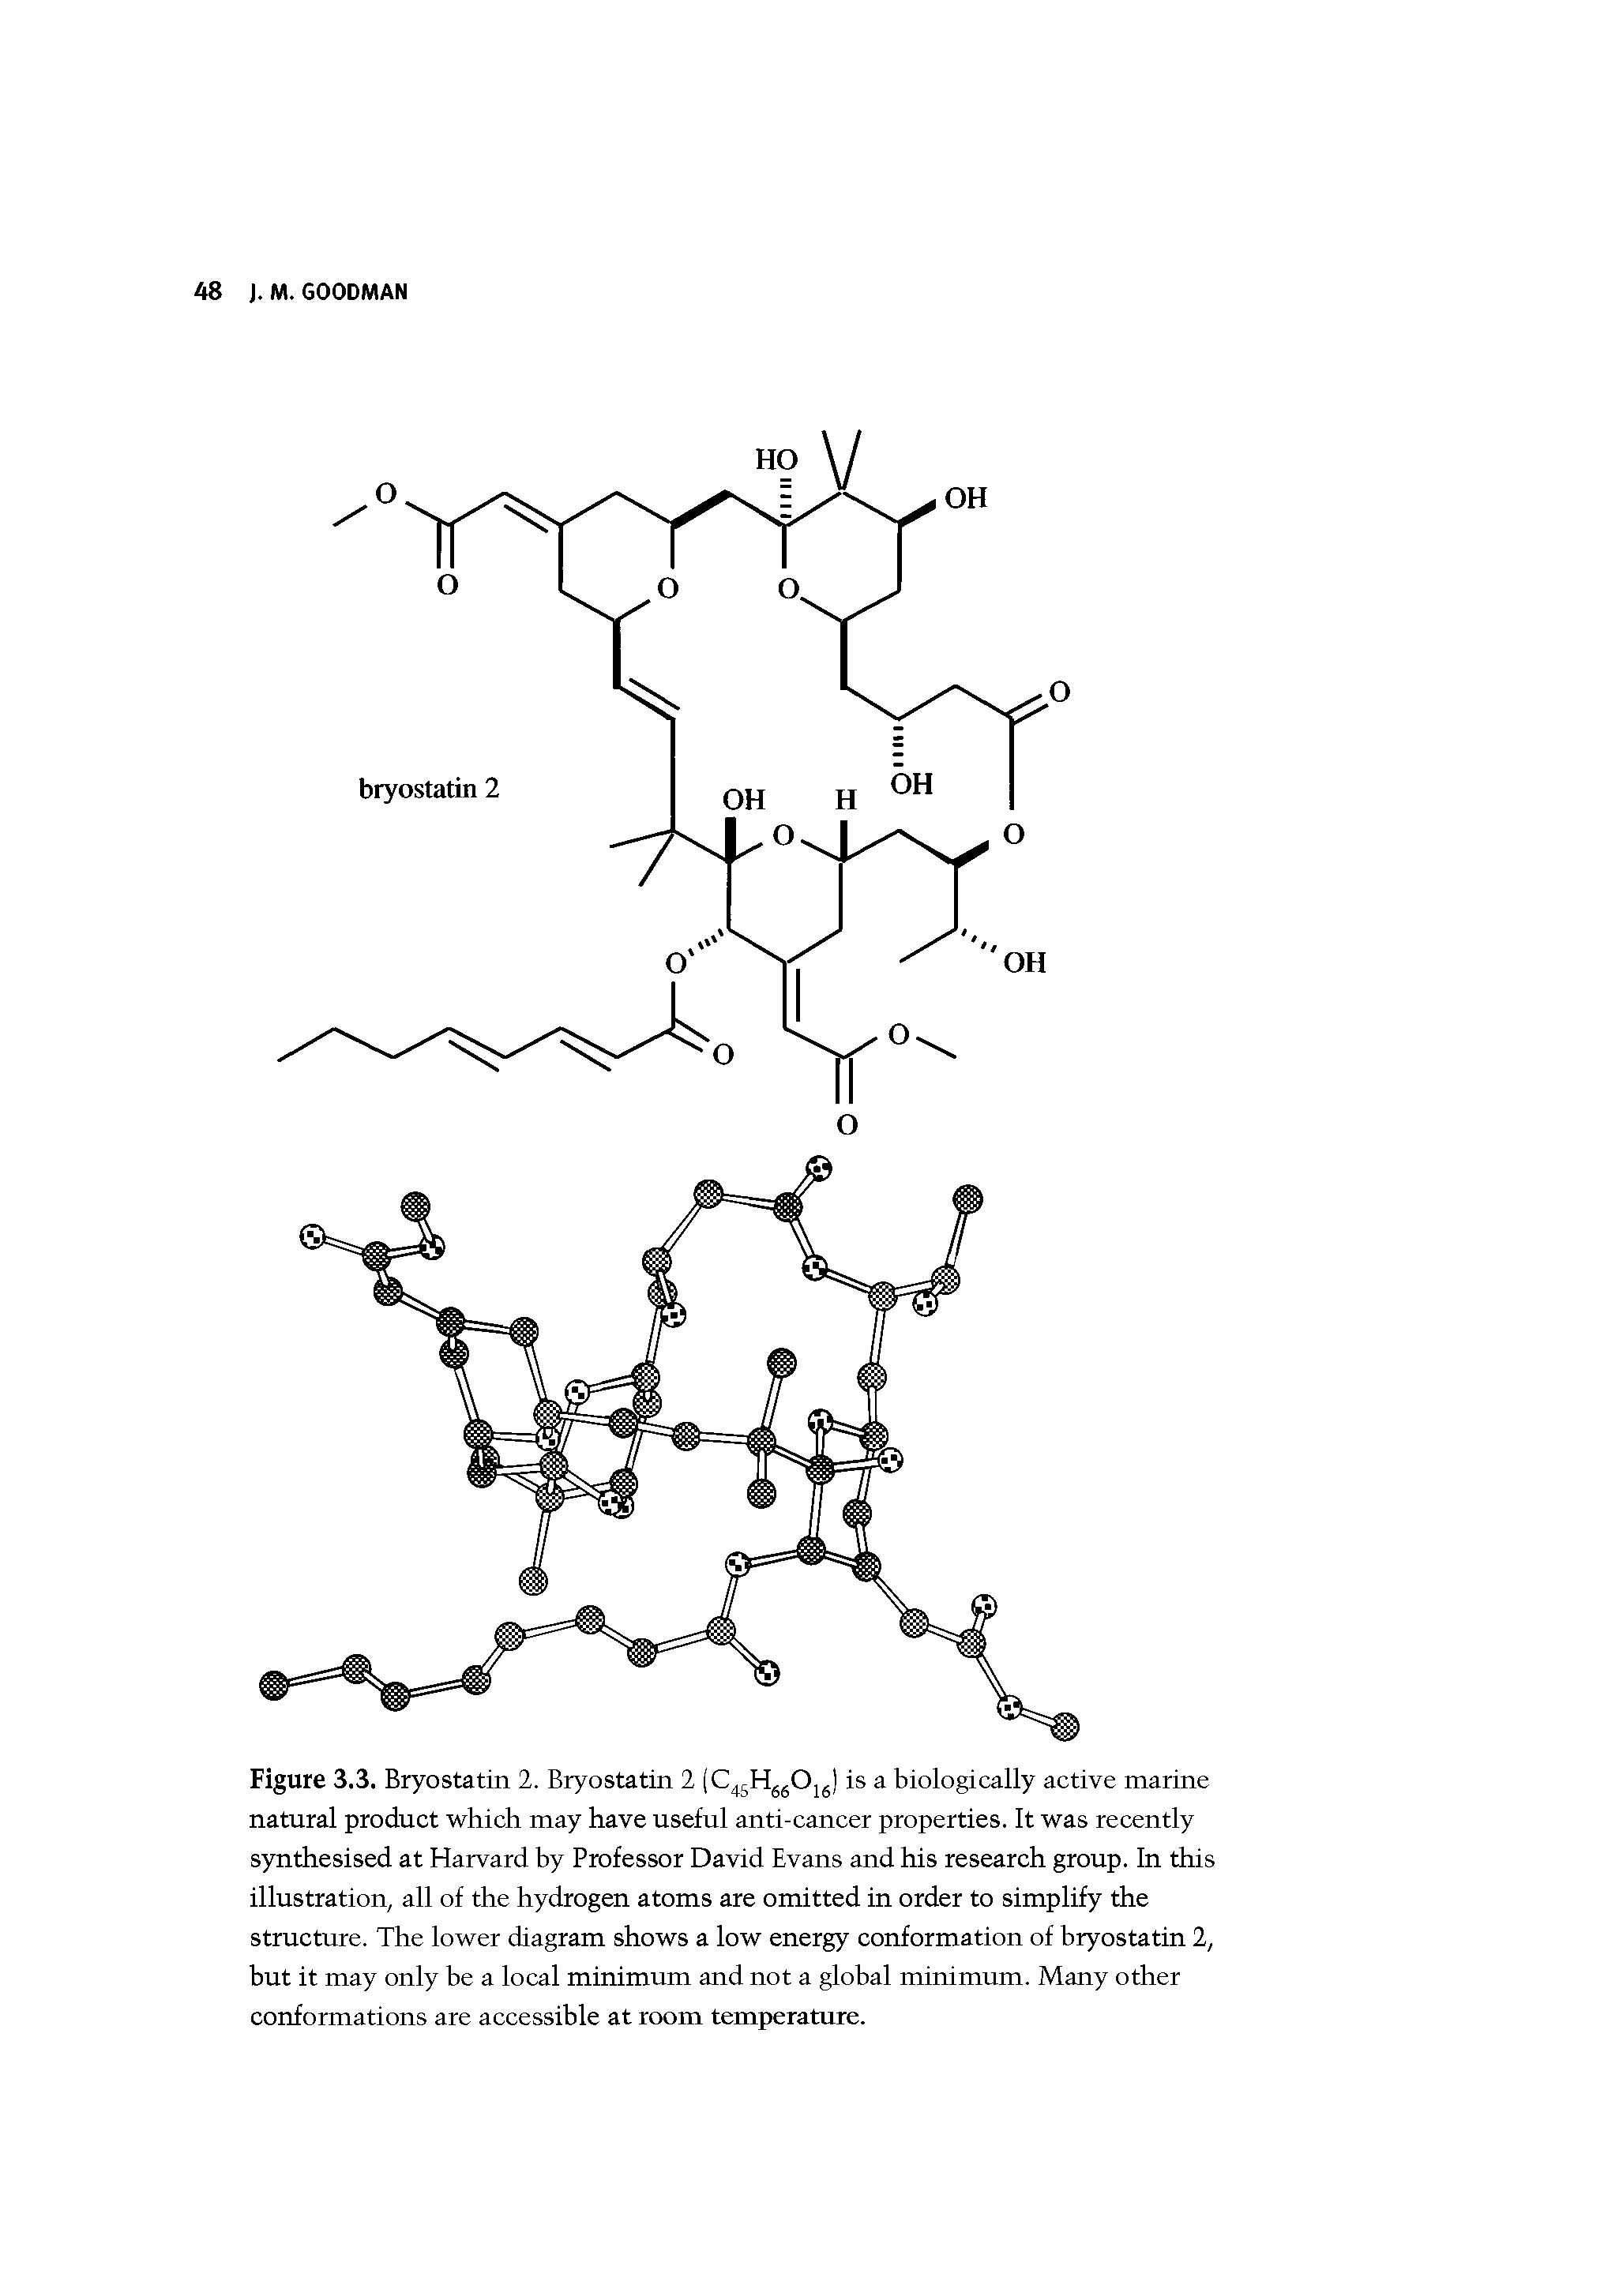 Figure 3.3. Bryostatin 2. Bryostatin 2 (C HggOjg) is a biologically active marine natural product which may have useful anti-cancer properties. It was recently synthesised at Harvard by Professor David Evans and his research group. In this illustration, all of the hydrogen atoms are omitted in order to simplify the structure. The lower diagram shows a low energy conformation of bryostatin 2, but it may only be a local minimum and not a global minimum. Many other conformations are accessible at room temperature.